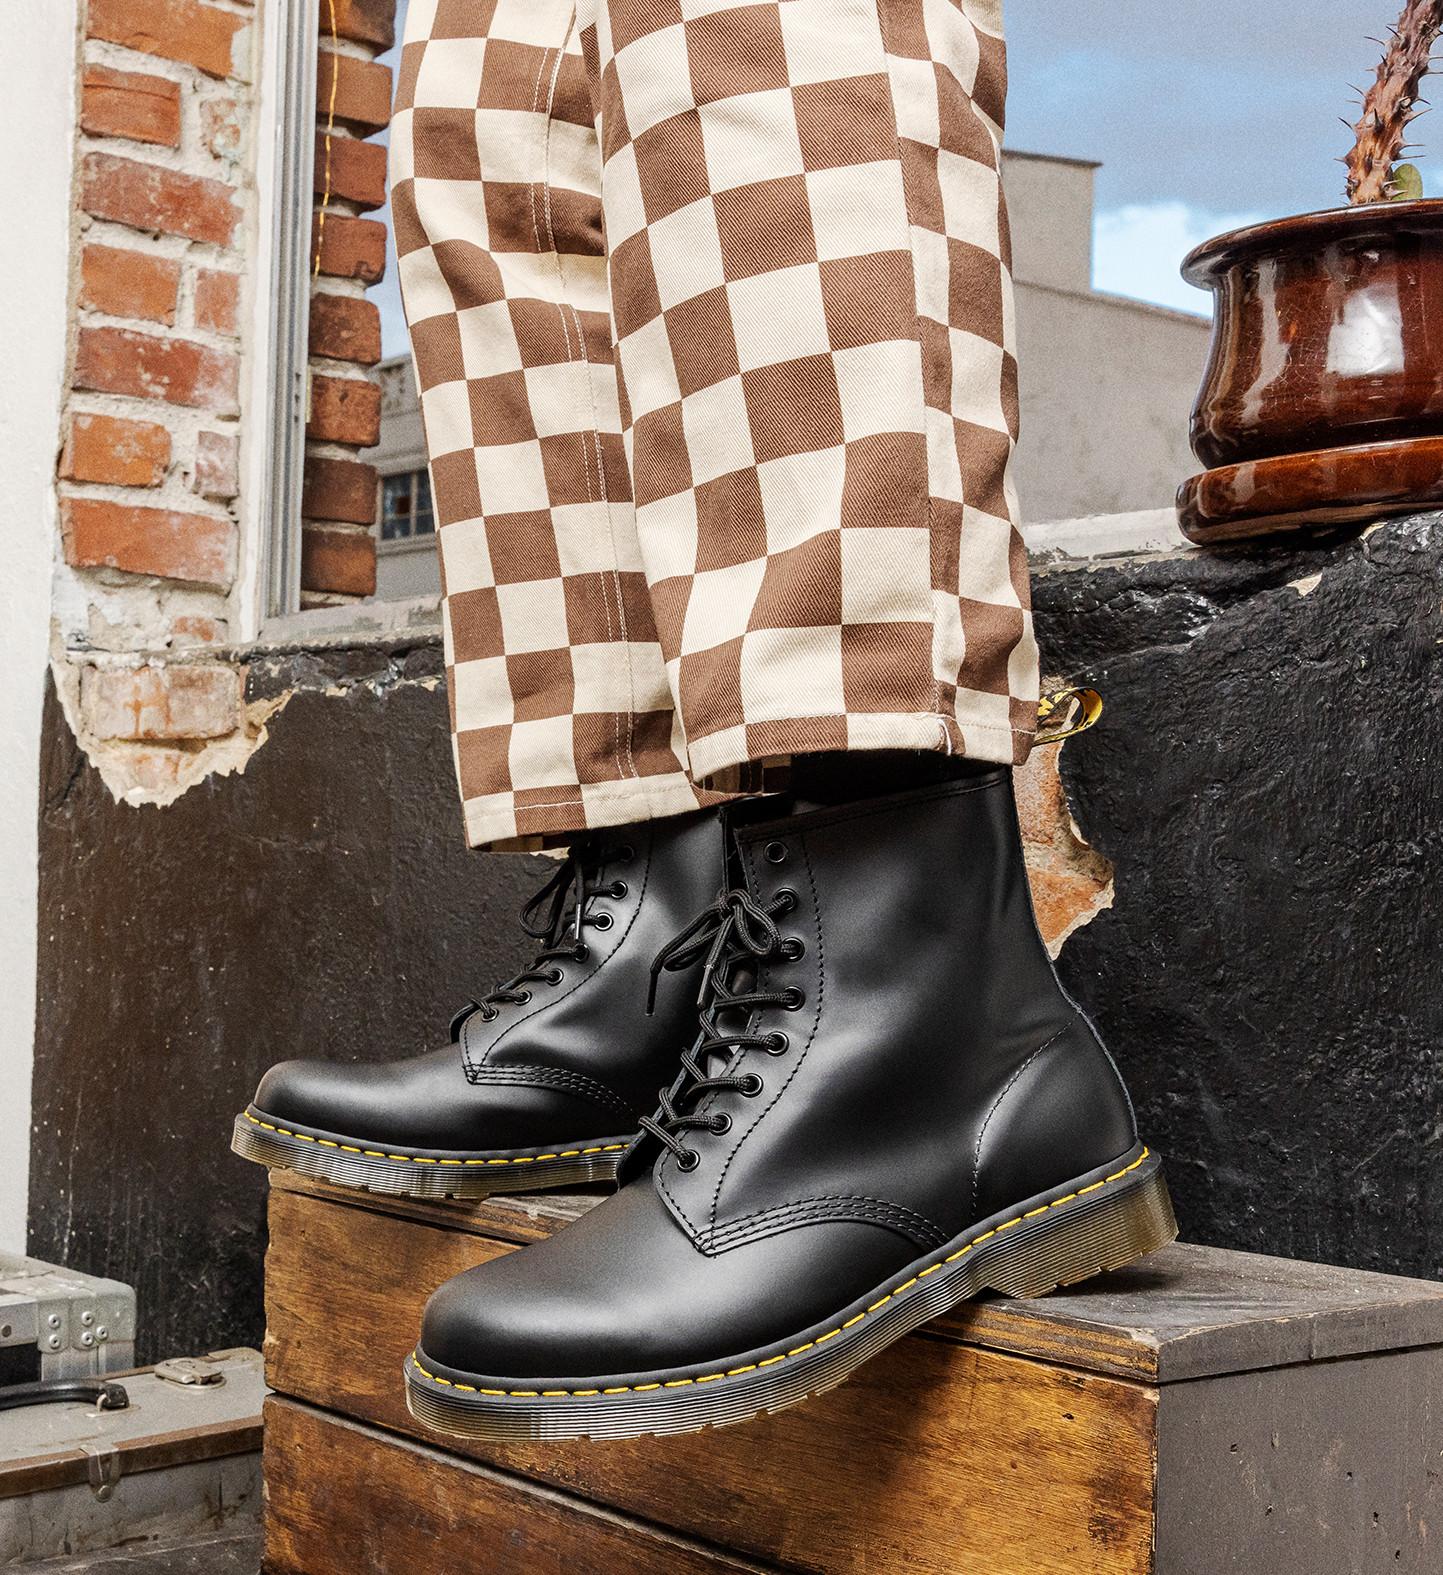 uitstulping referentie zeewier Dr. Martens® US Official: Up To 30% Off Select Styles